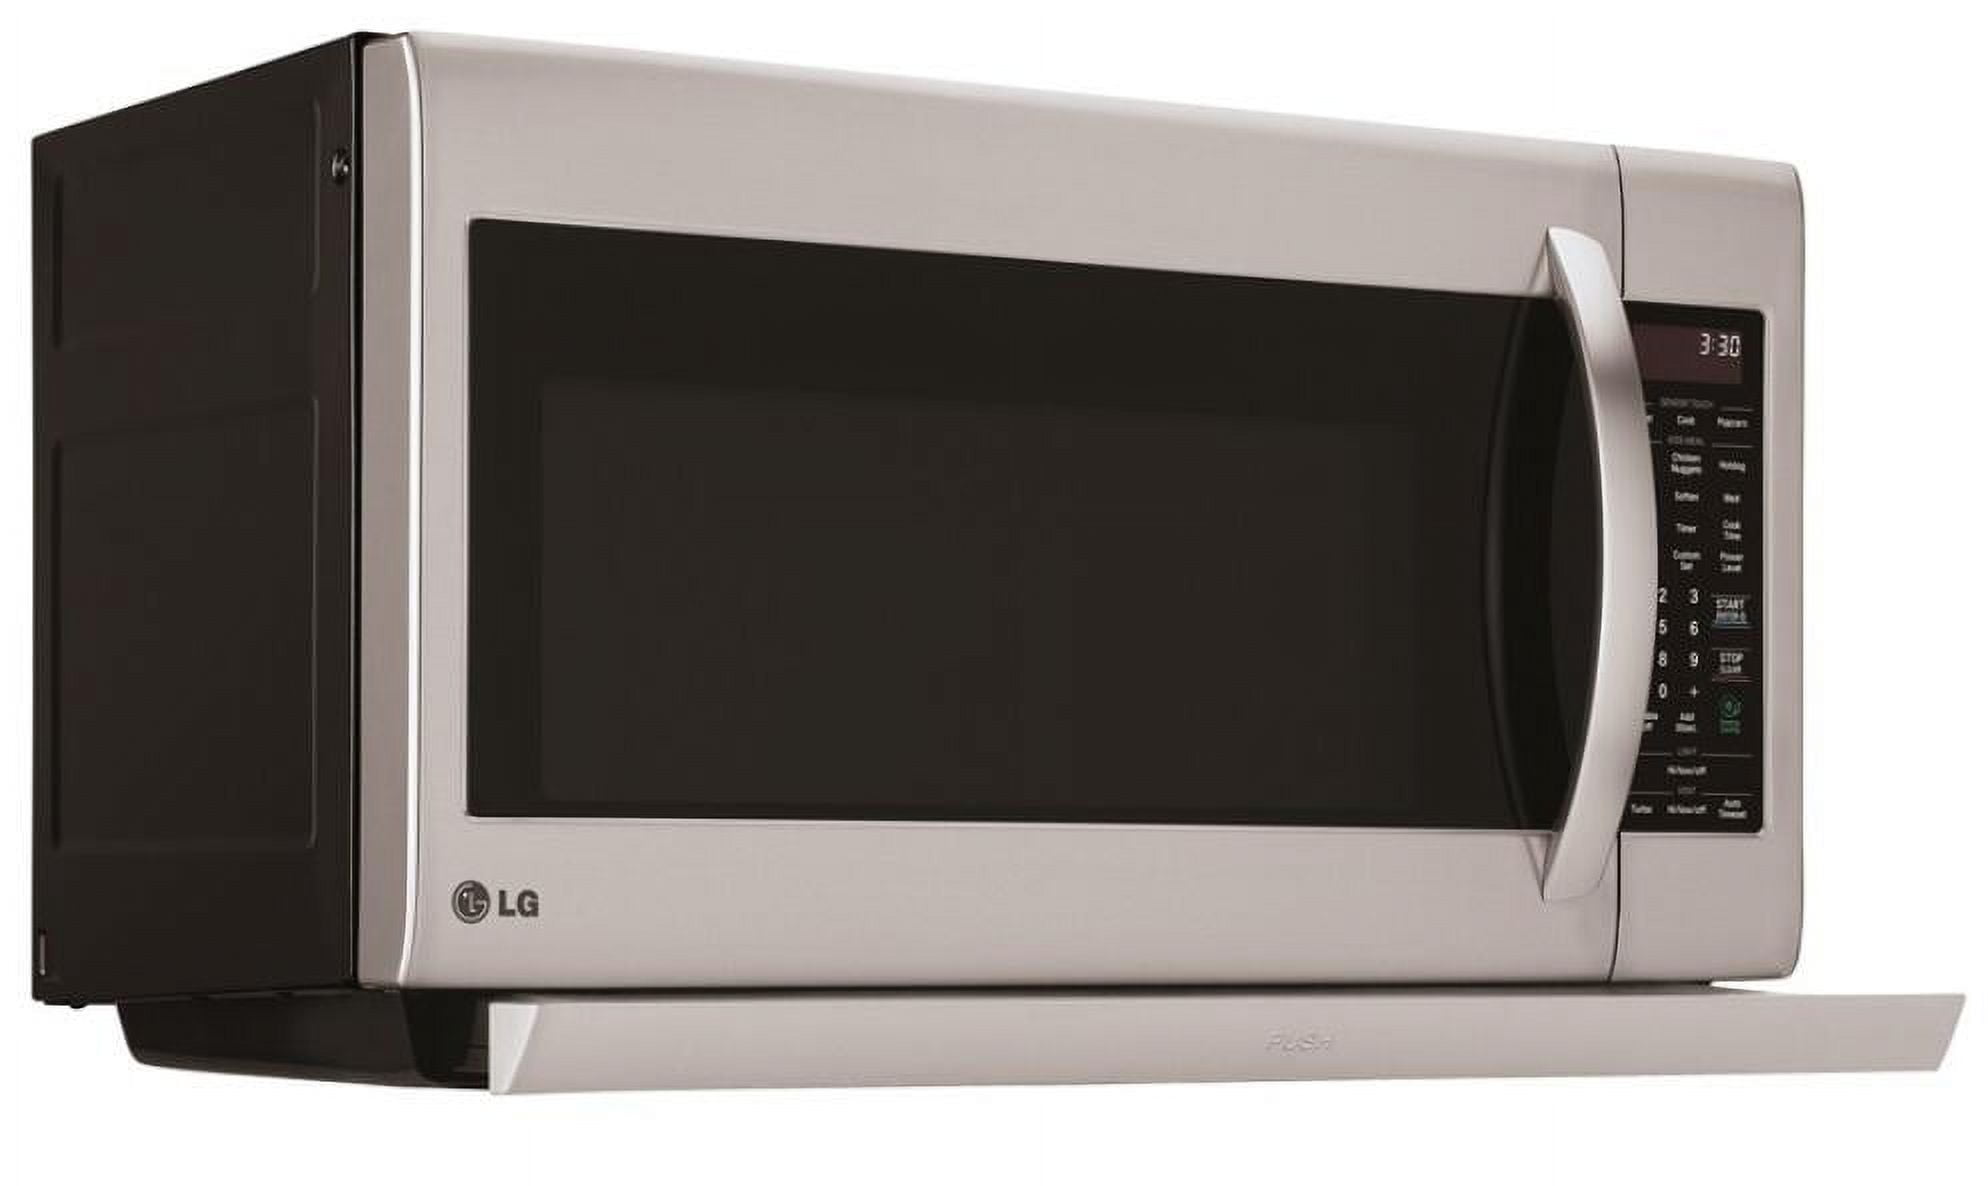 Where can I get LG vent cover for microwave? : r/Appliances